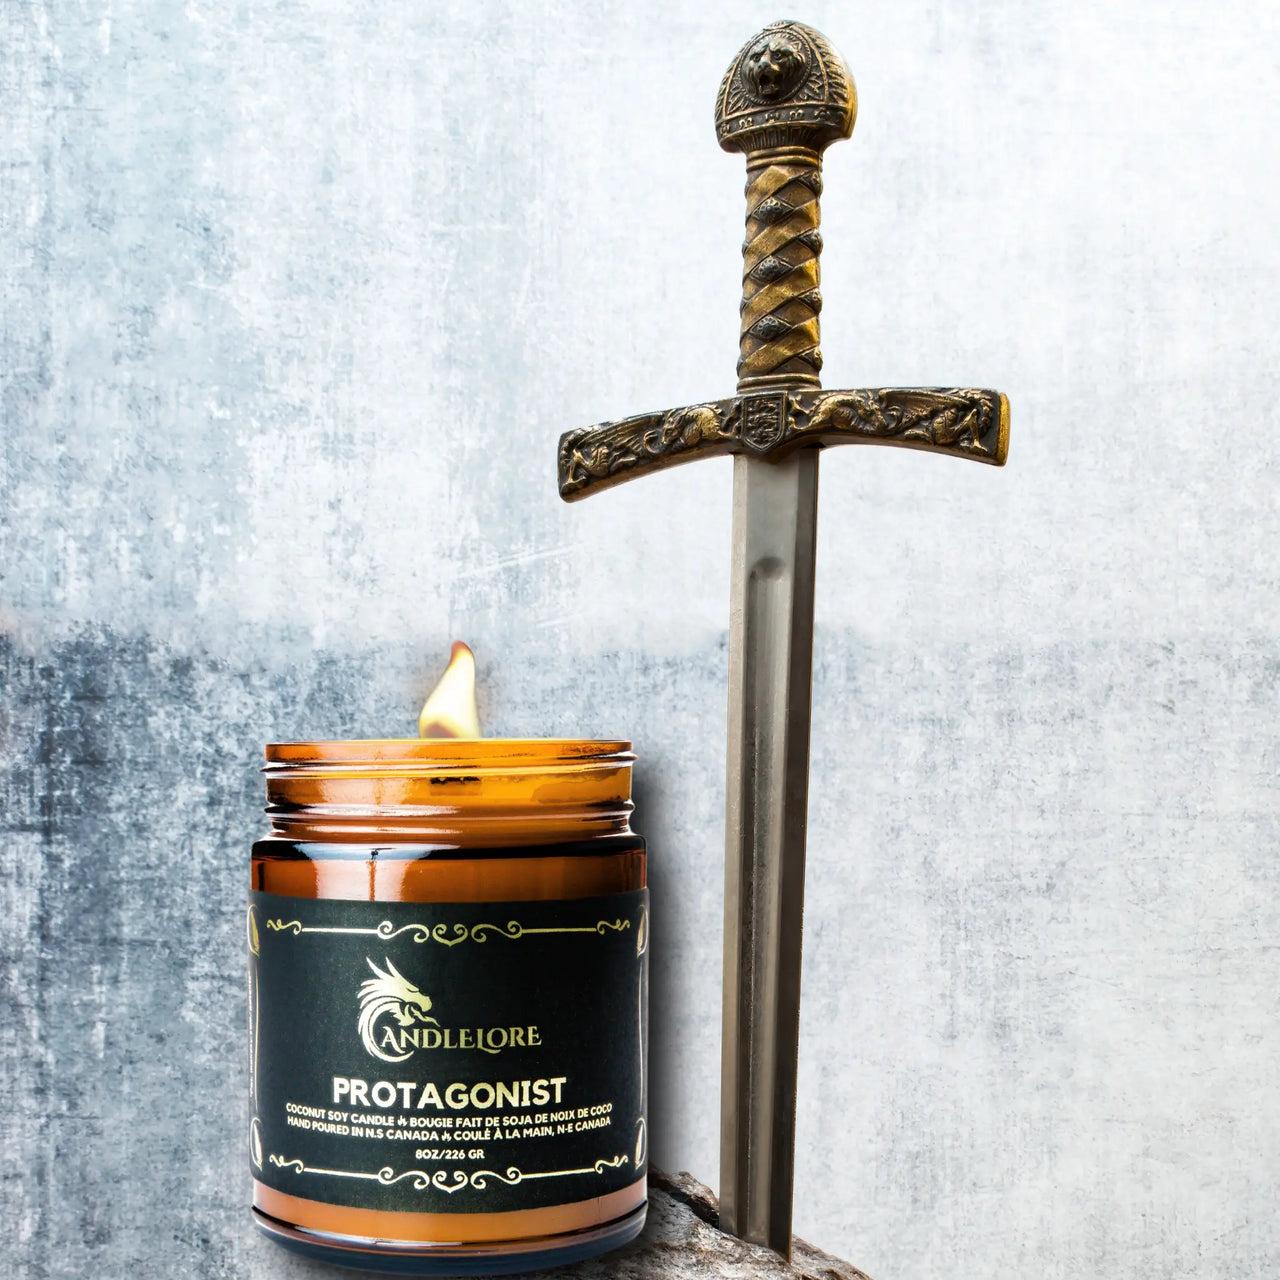 Protagonist Candle With a sword